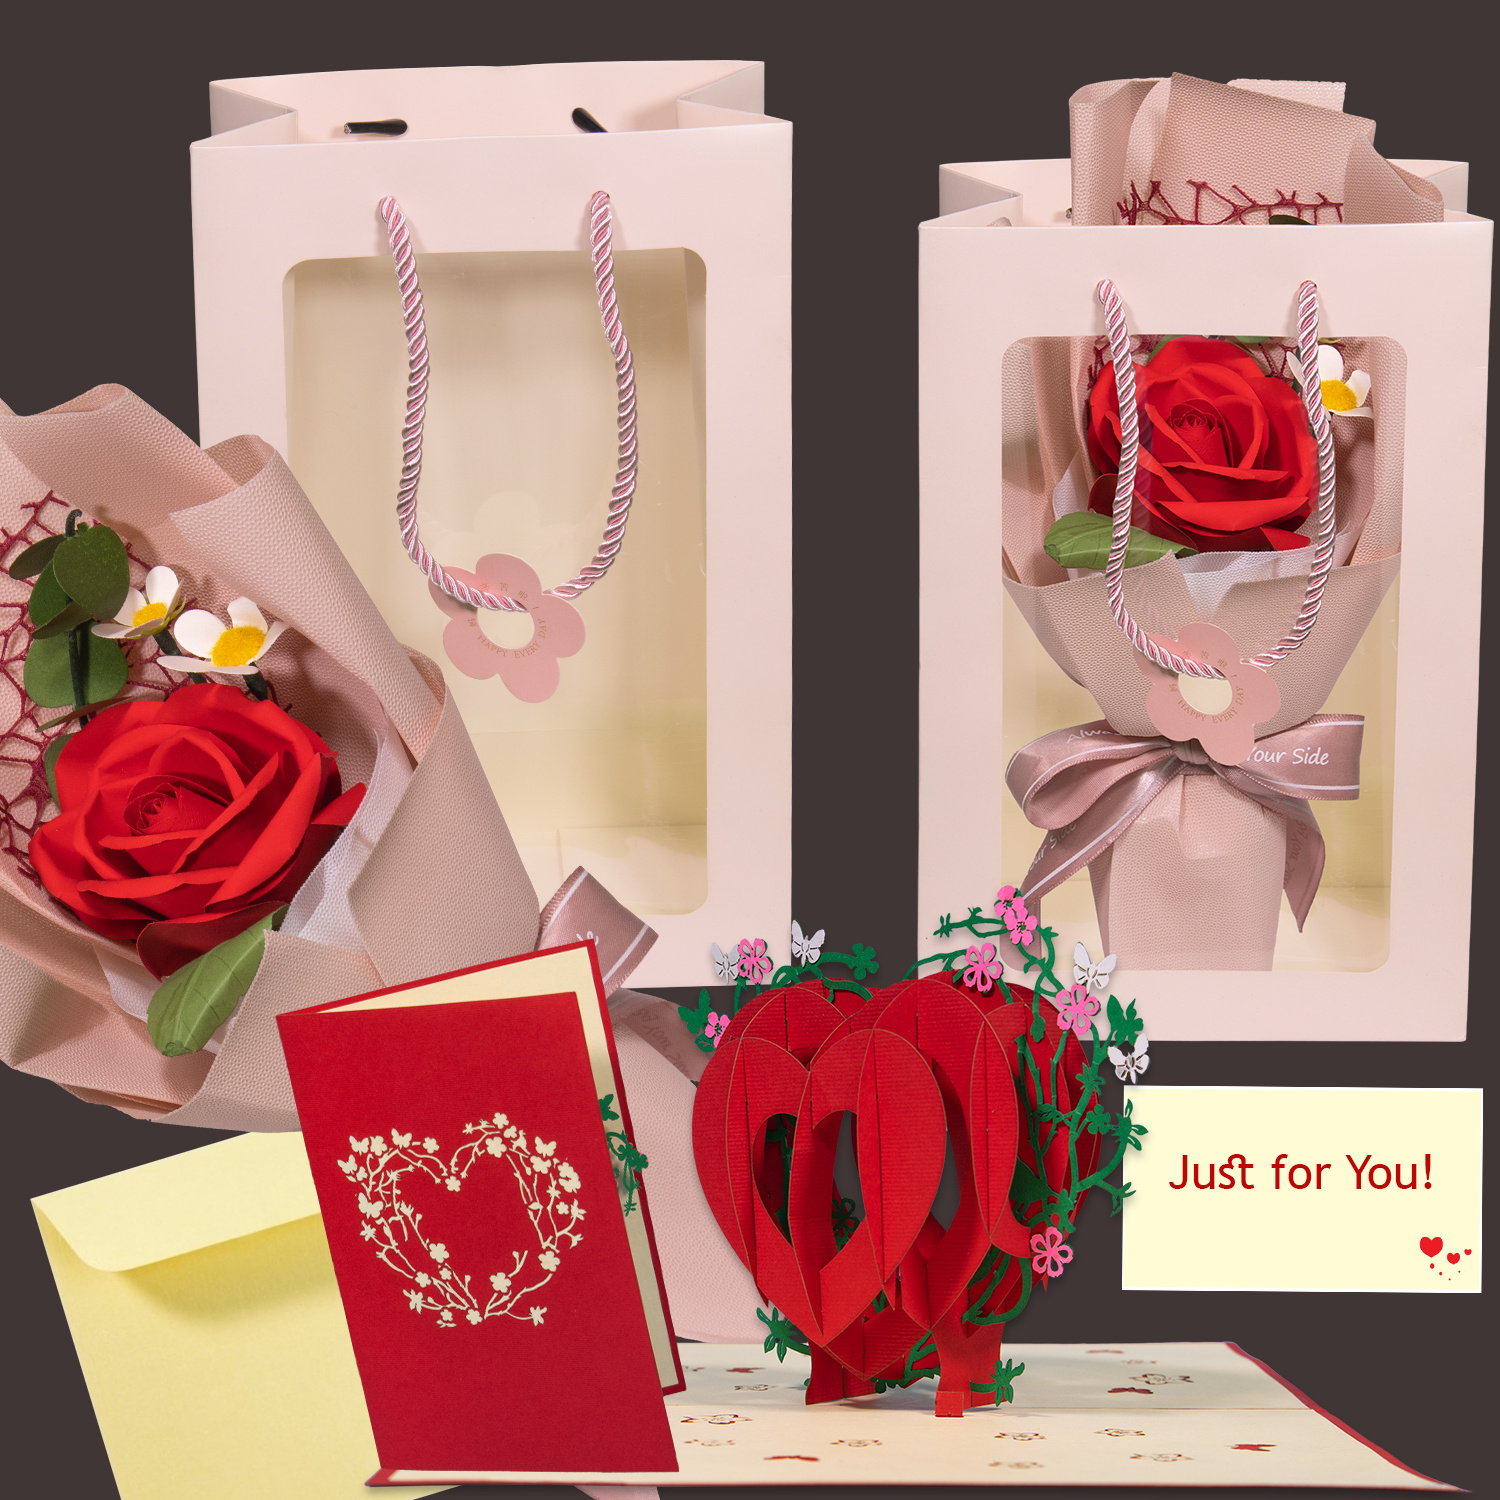 LINPOPUP LINPOPUP Love Gift Valentine's Day or for Anniversary and Wedding Anniversary - Handmade Eternal Rose with 3D - Pop - Up Card Heart made of high quality paper in an exclusive bag